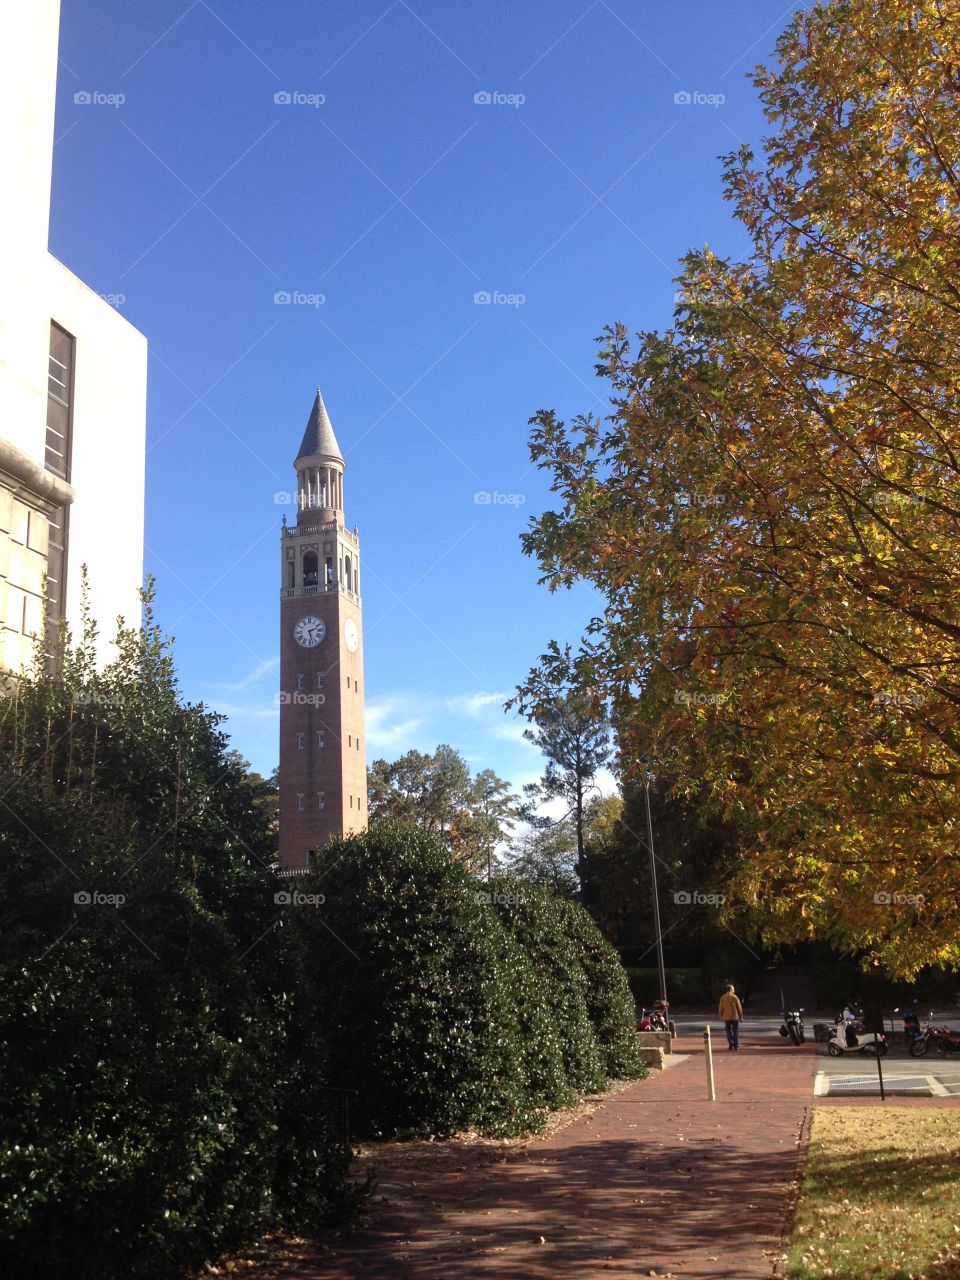 Bell tower in the Fall. UNC-CH bell tower with trees in the fall